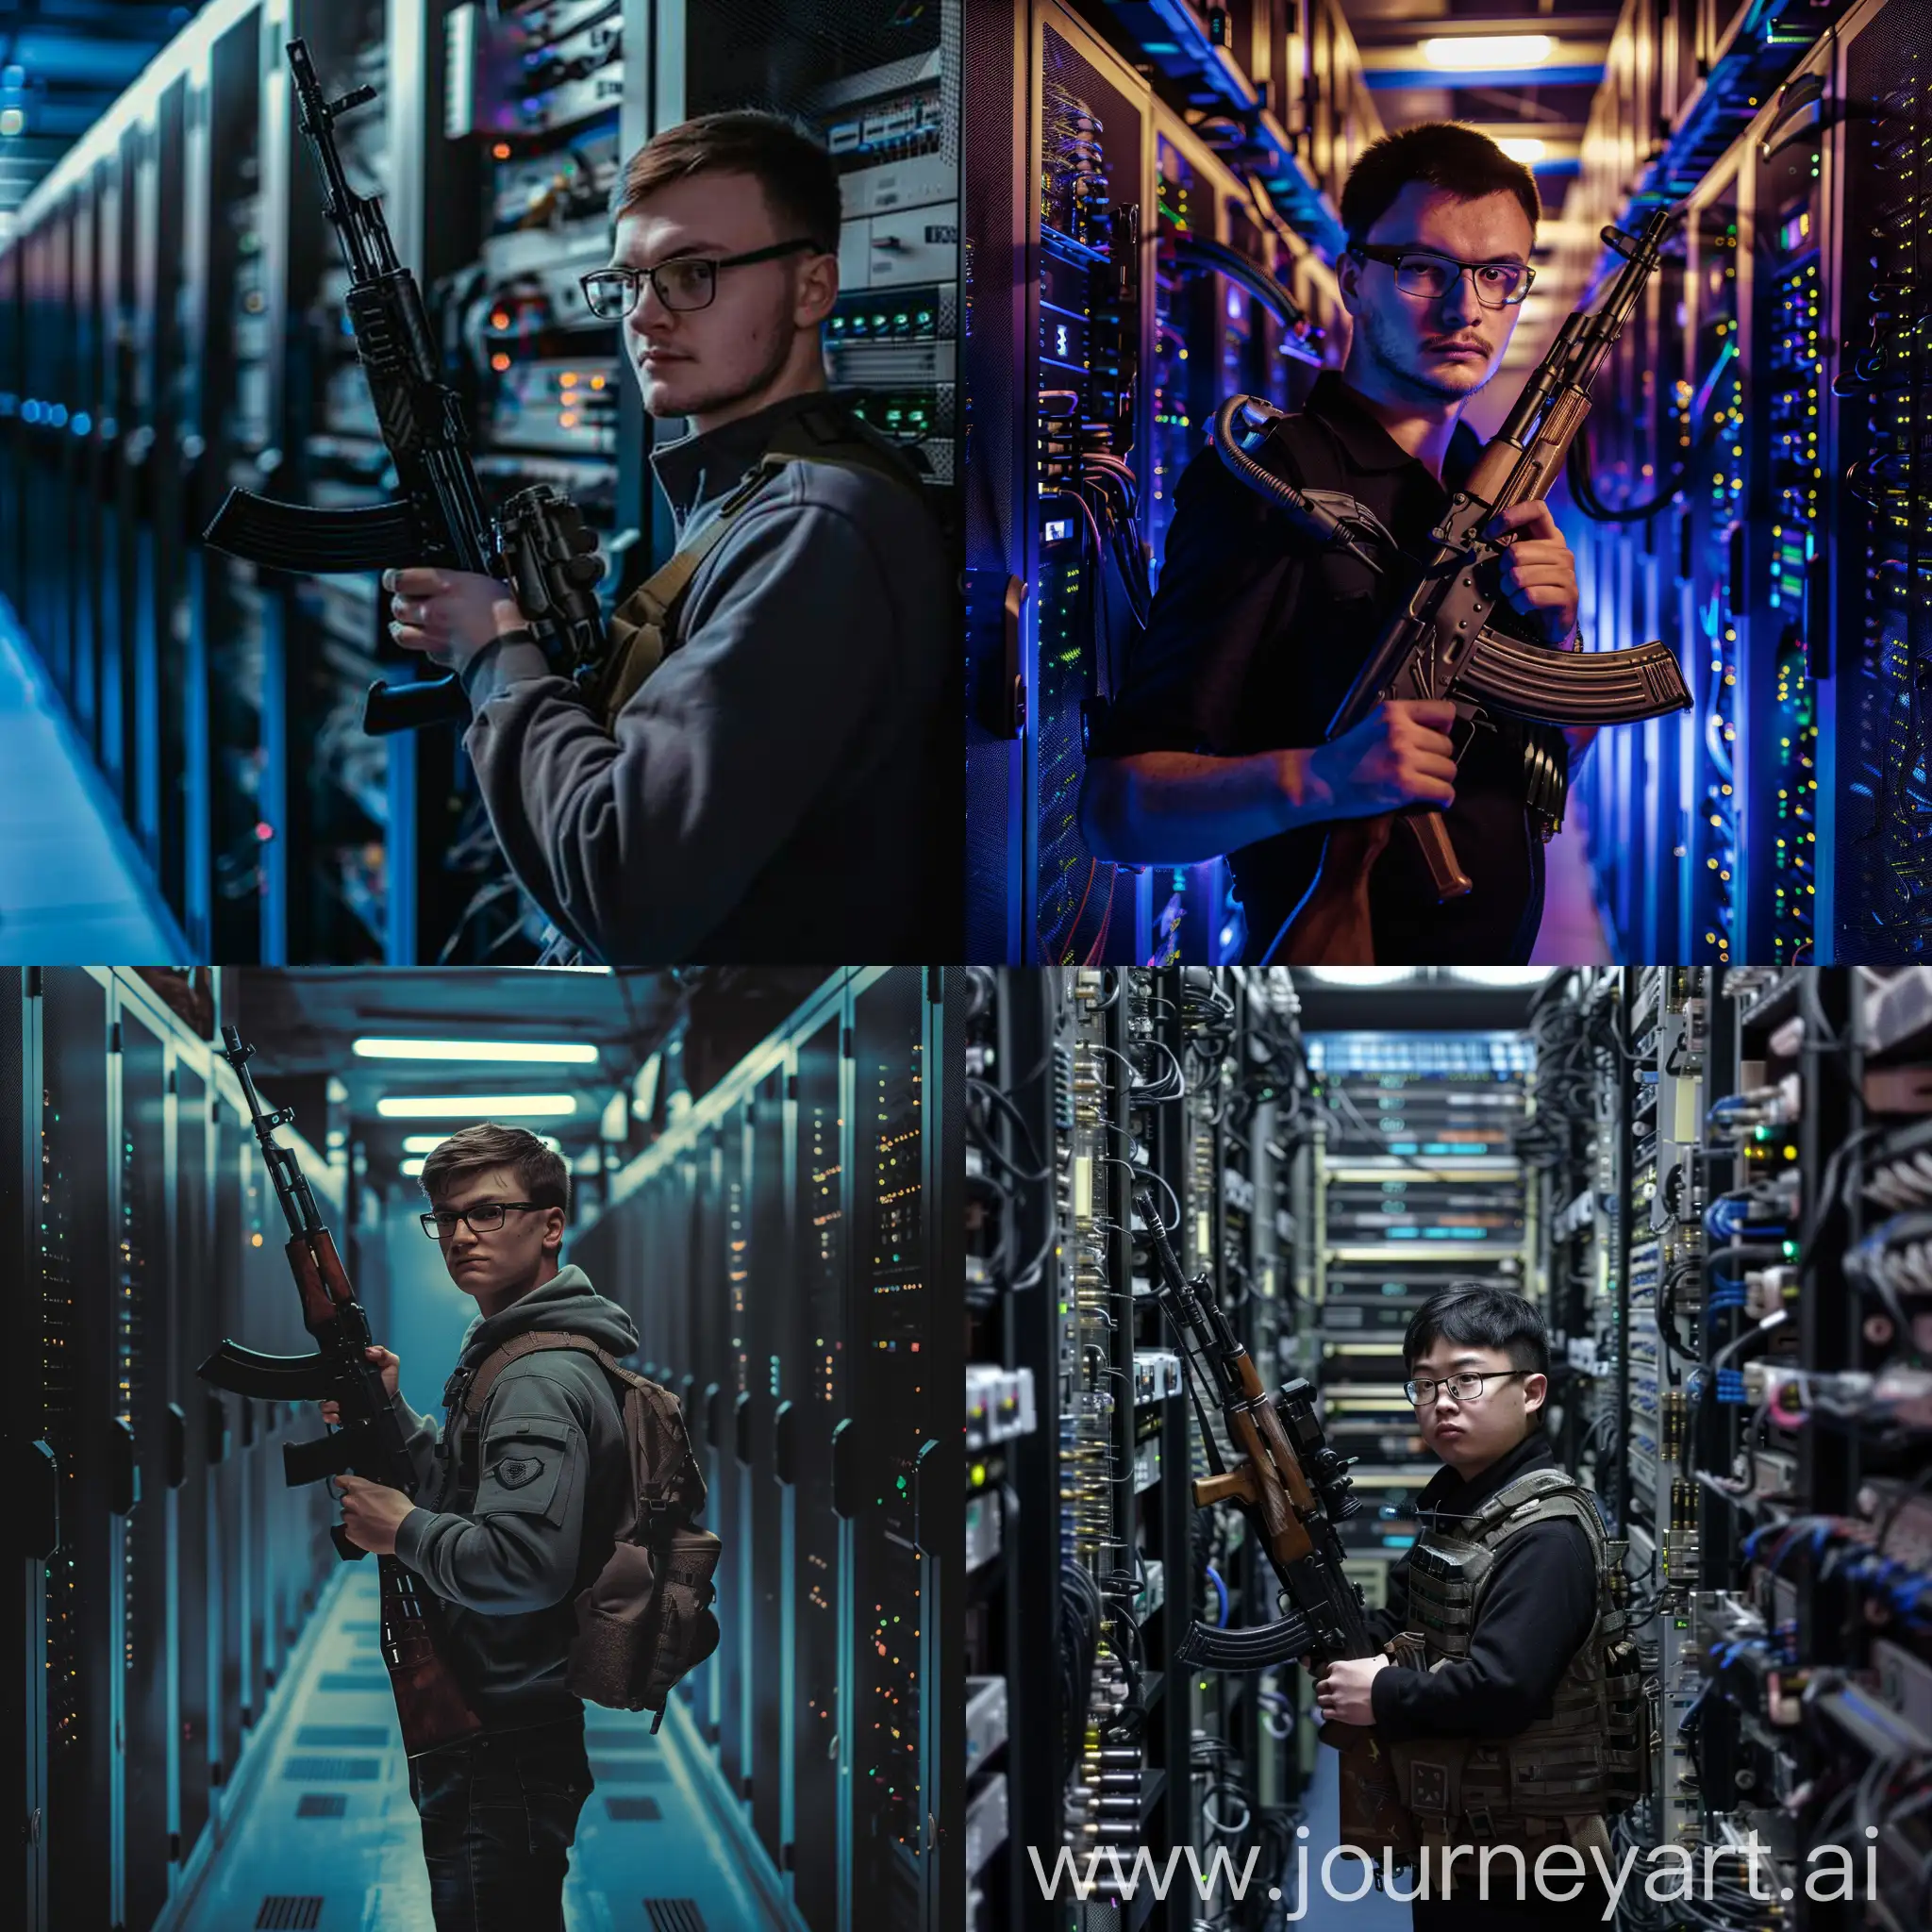 Gamer-with-Glasses-Holding-AK47-Surrounded-by-Server-Computers